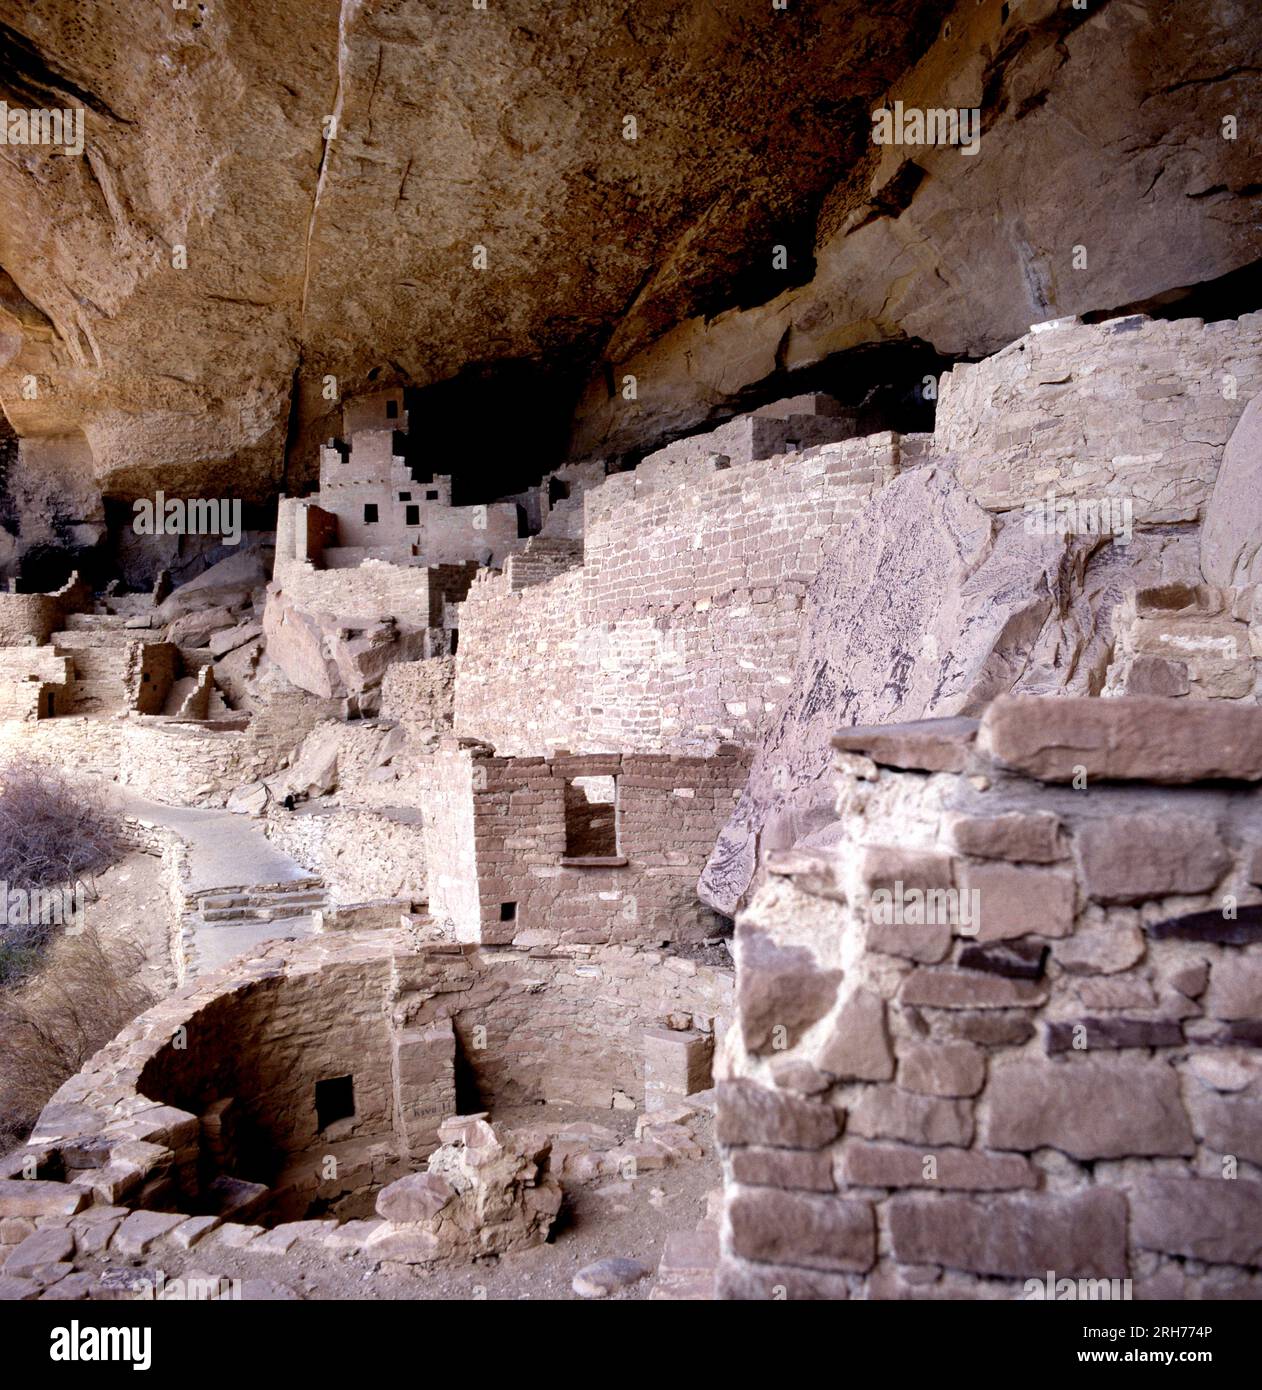 View of the cliff dwellings and Cliff Palace as part of preserved ancestral Puebloan archaeological site in Mesa Verde National Park, Colorado, USA Stock Photo